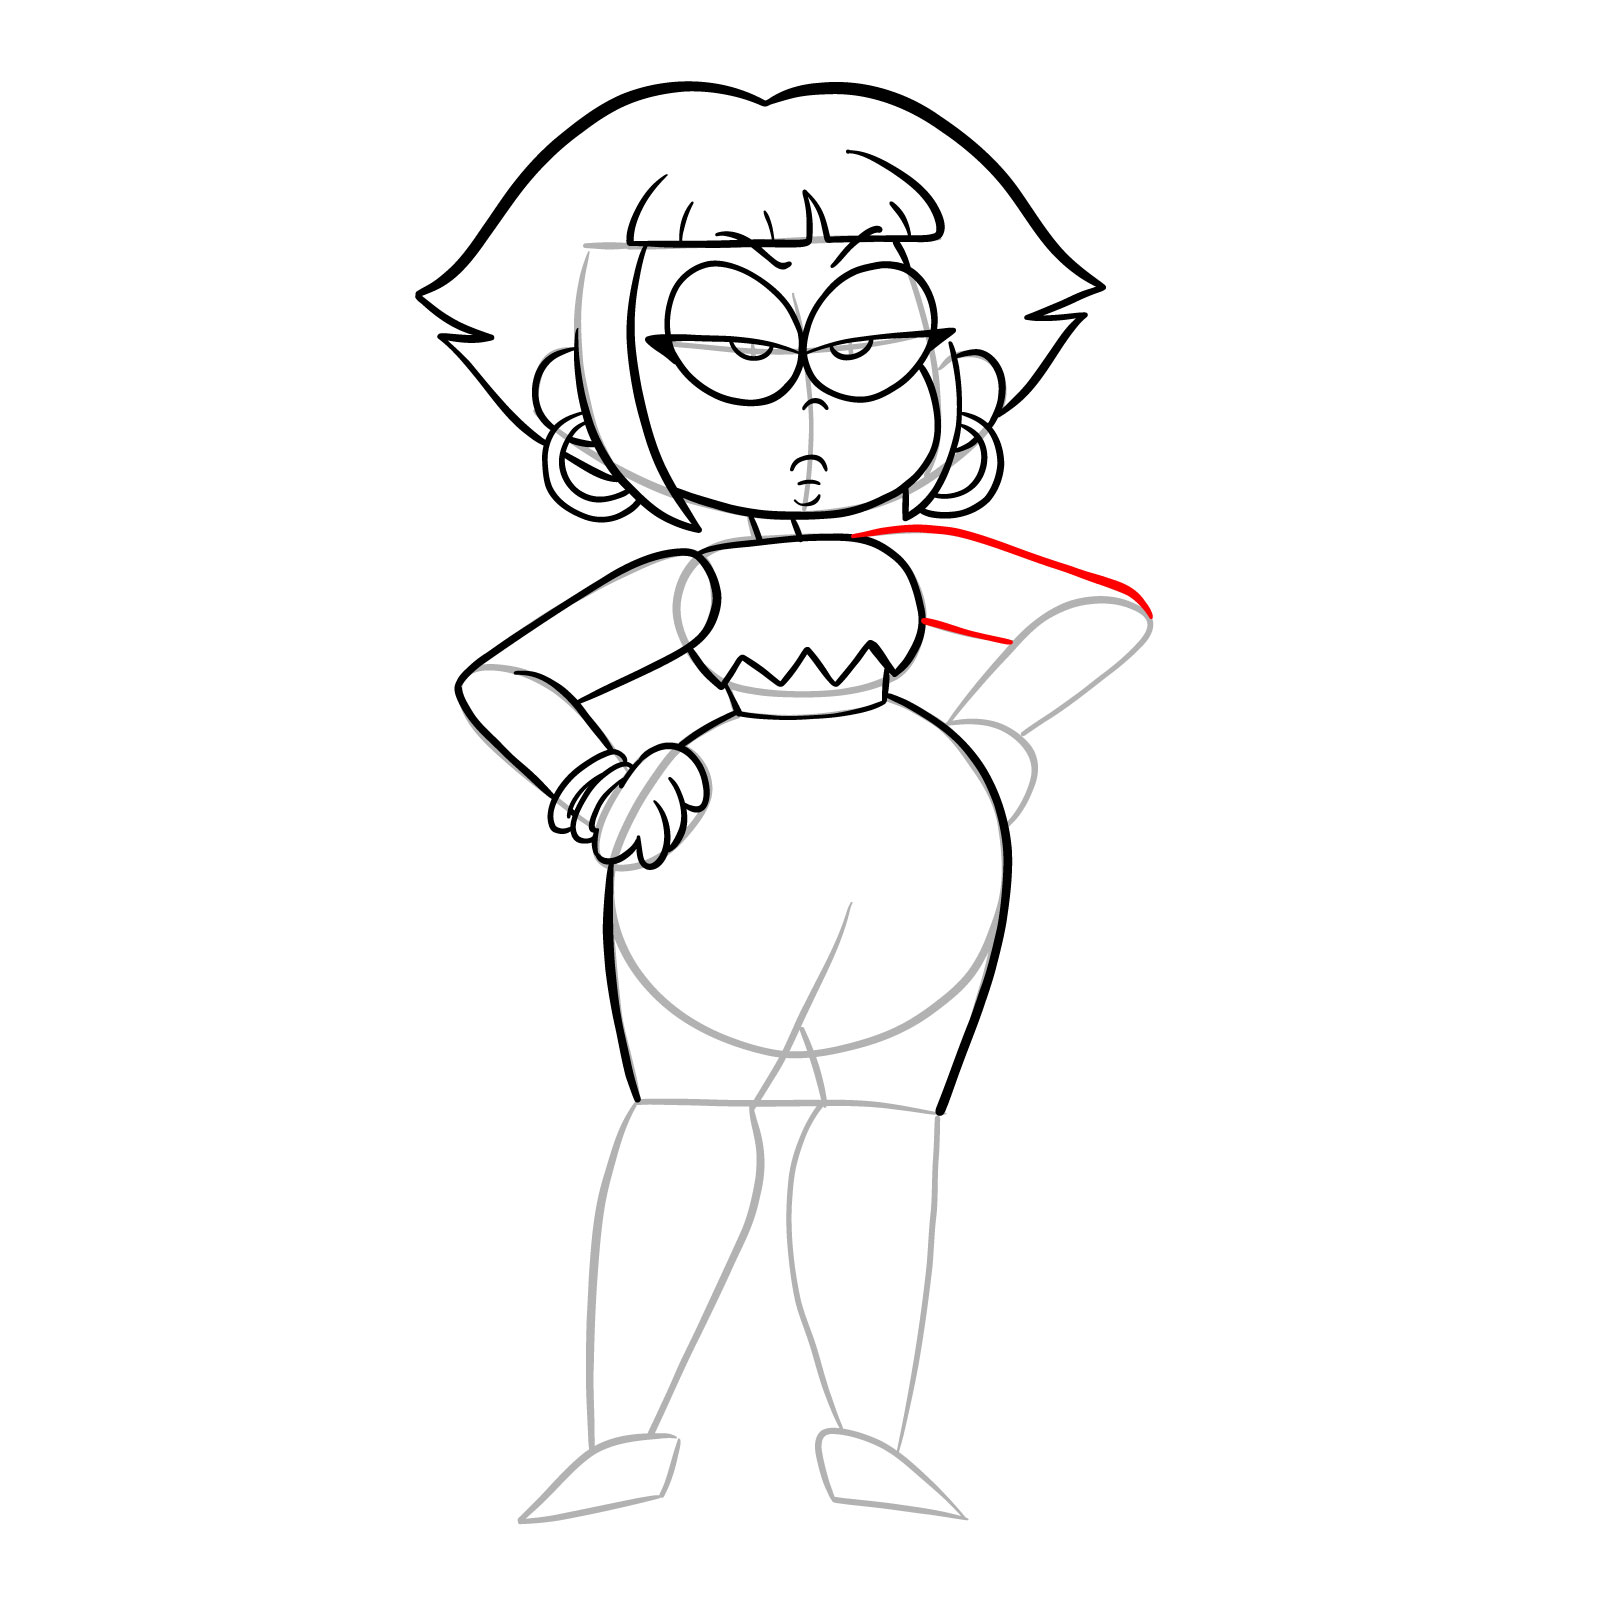 How to draw Human Shannon from OK K.O.! - step 22